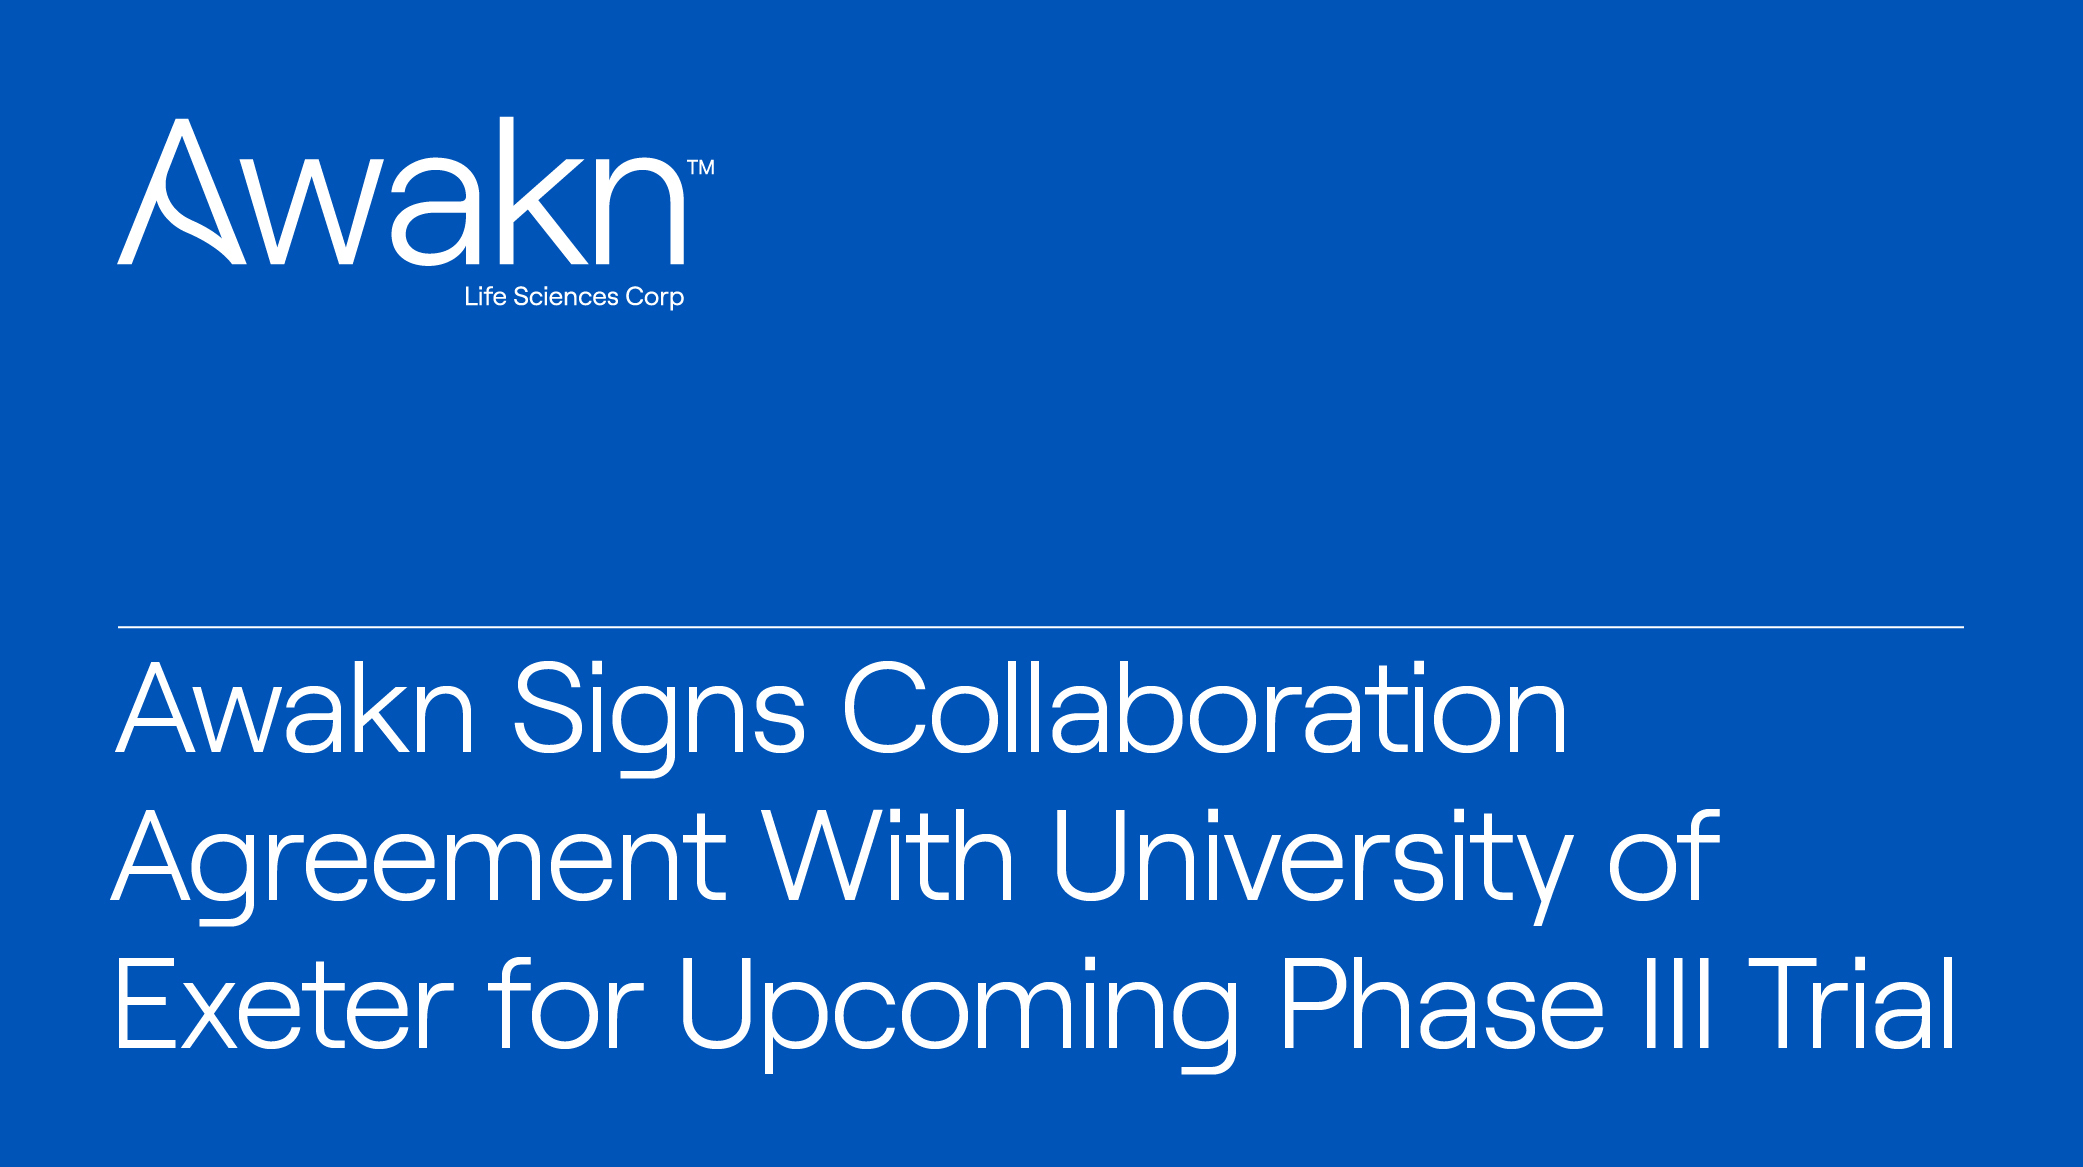 Awakn Signs Collaboration Agreement With University of Exeter for Upcoming Phase III Trial